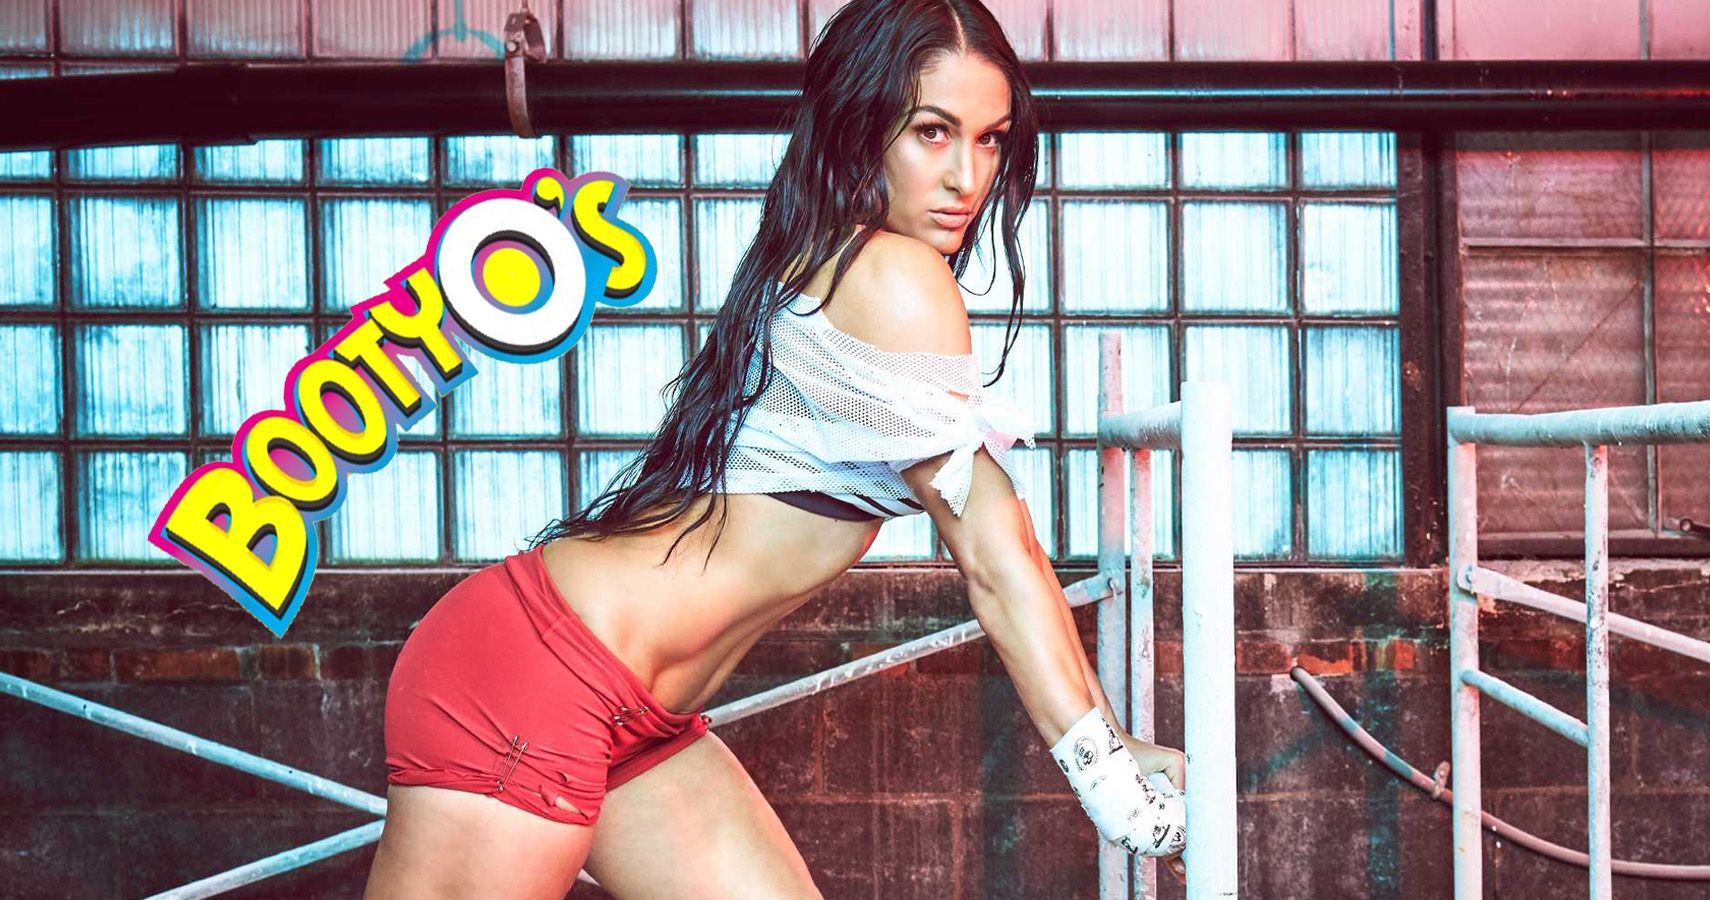 15 Hot Af Pictures That Prove Nikki Bella Has Been Eating Her Images, Photos, Reviews